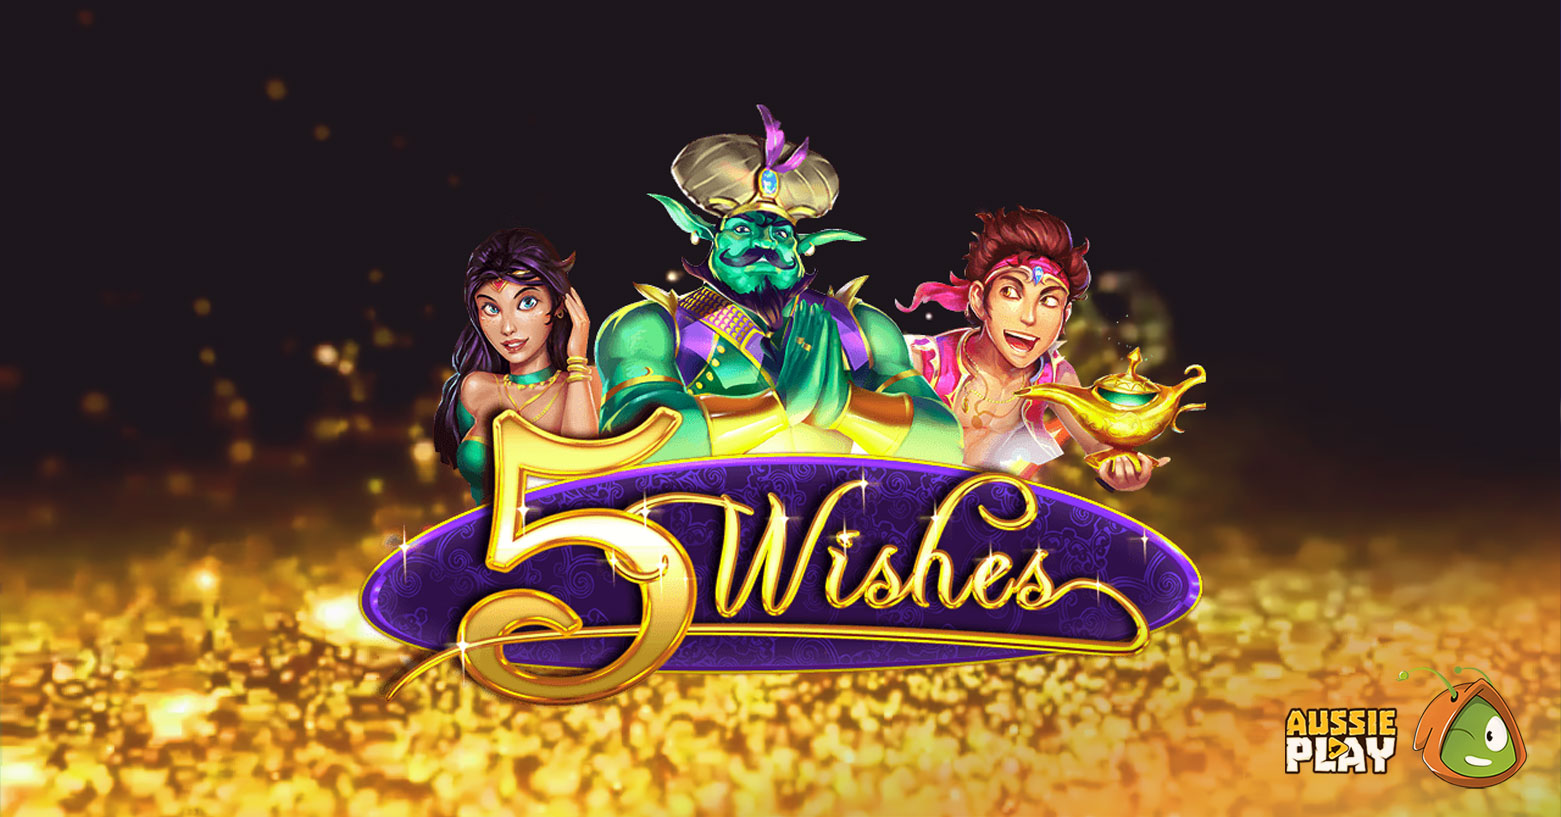 5 Wishes Slots online